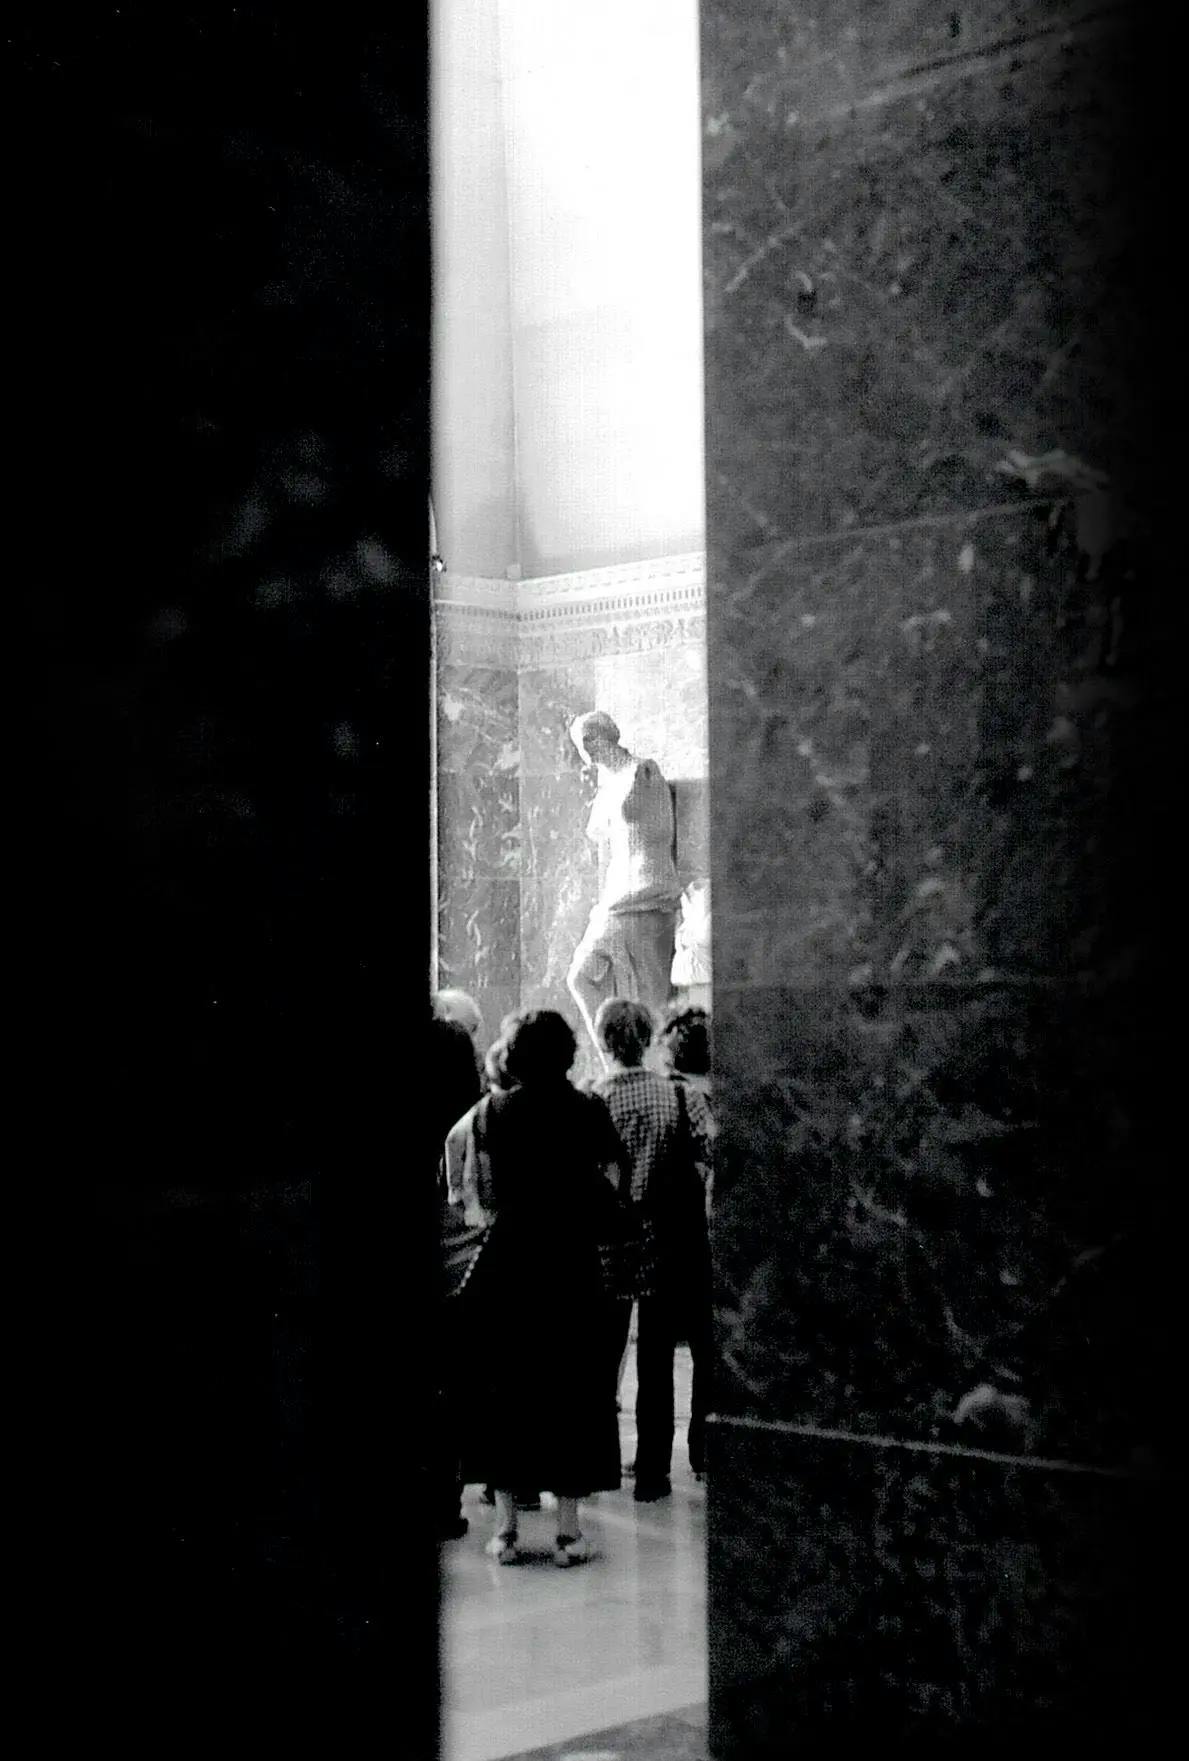 The white marble roman statue, Vinus de Milo, in the Louvres surrounded by a handful of onlookers.